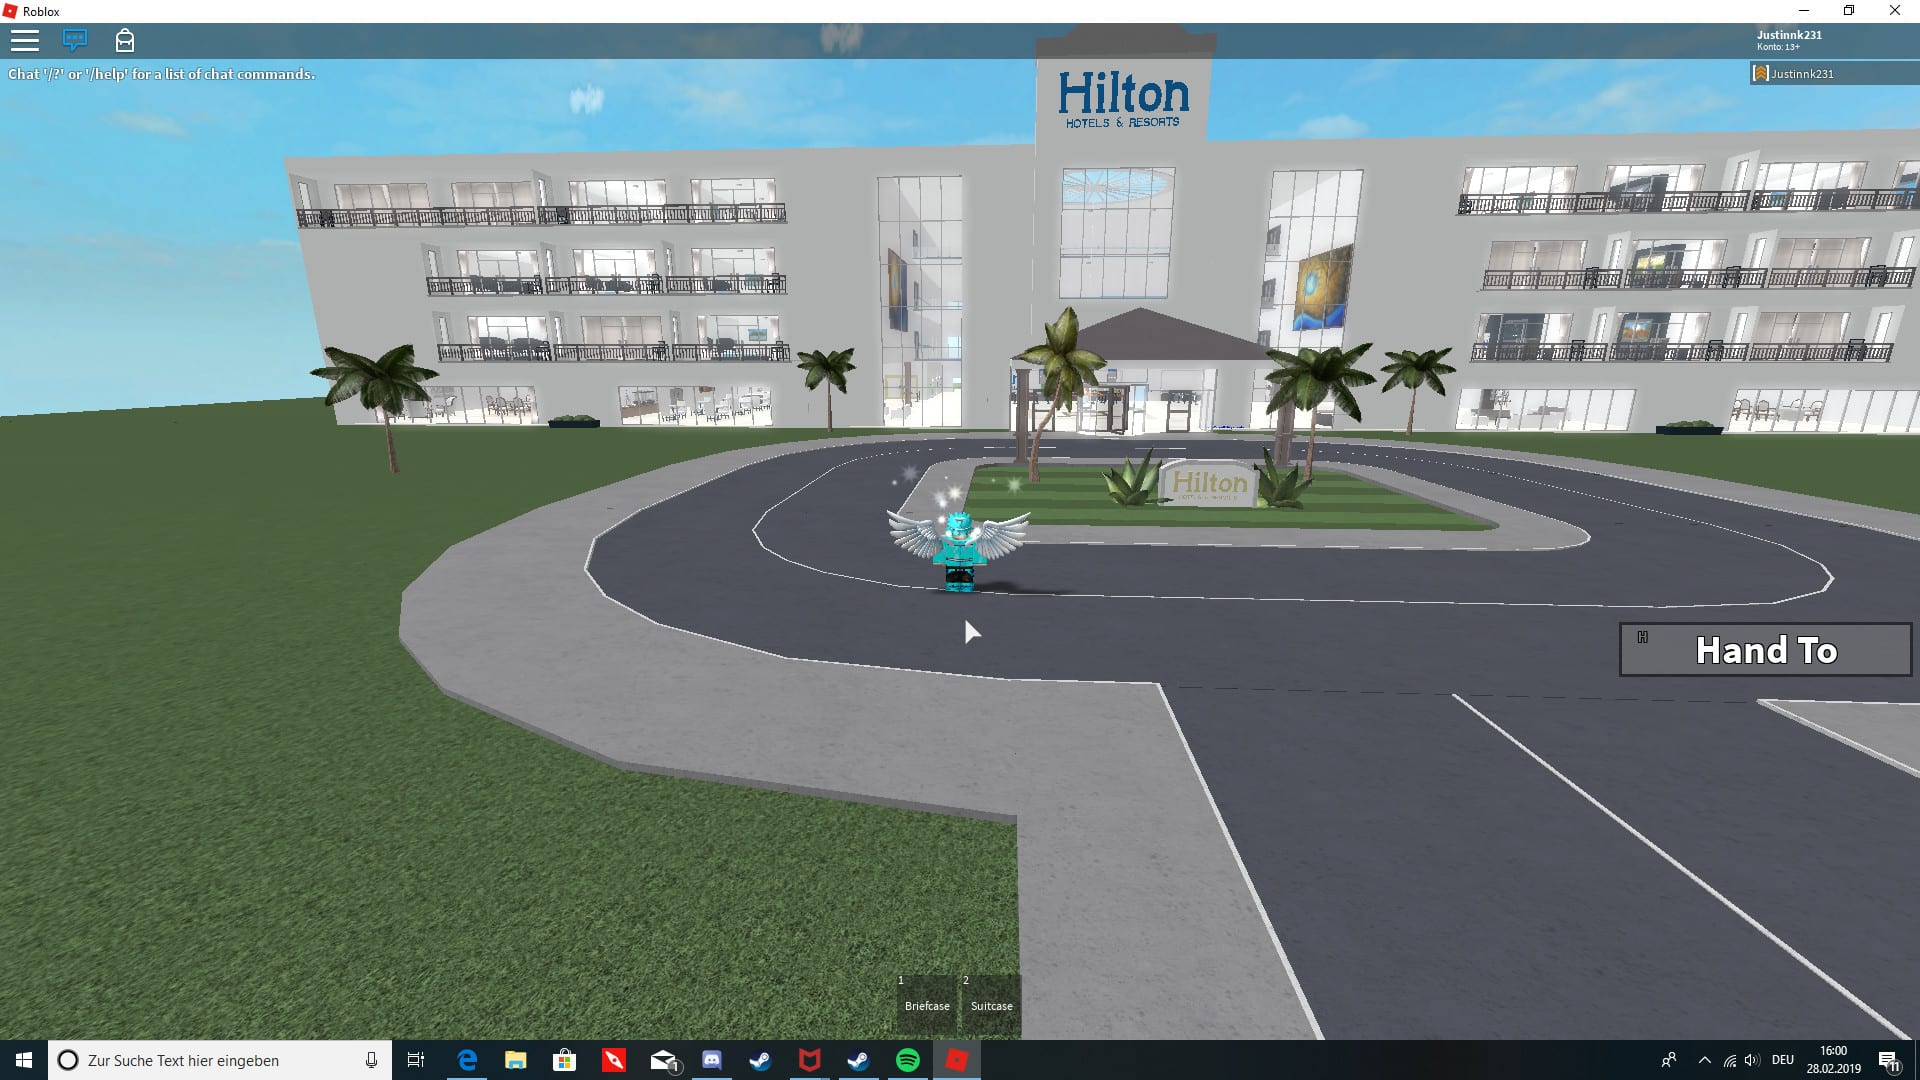 Give You A High Quality Game In Roblox By Jakekllr - hilton hotels resort roblox